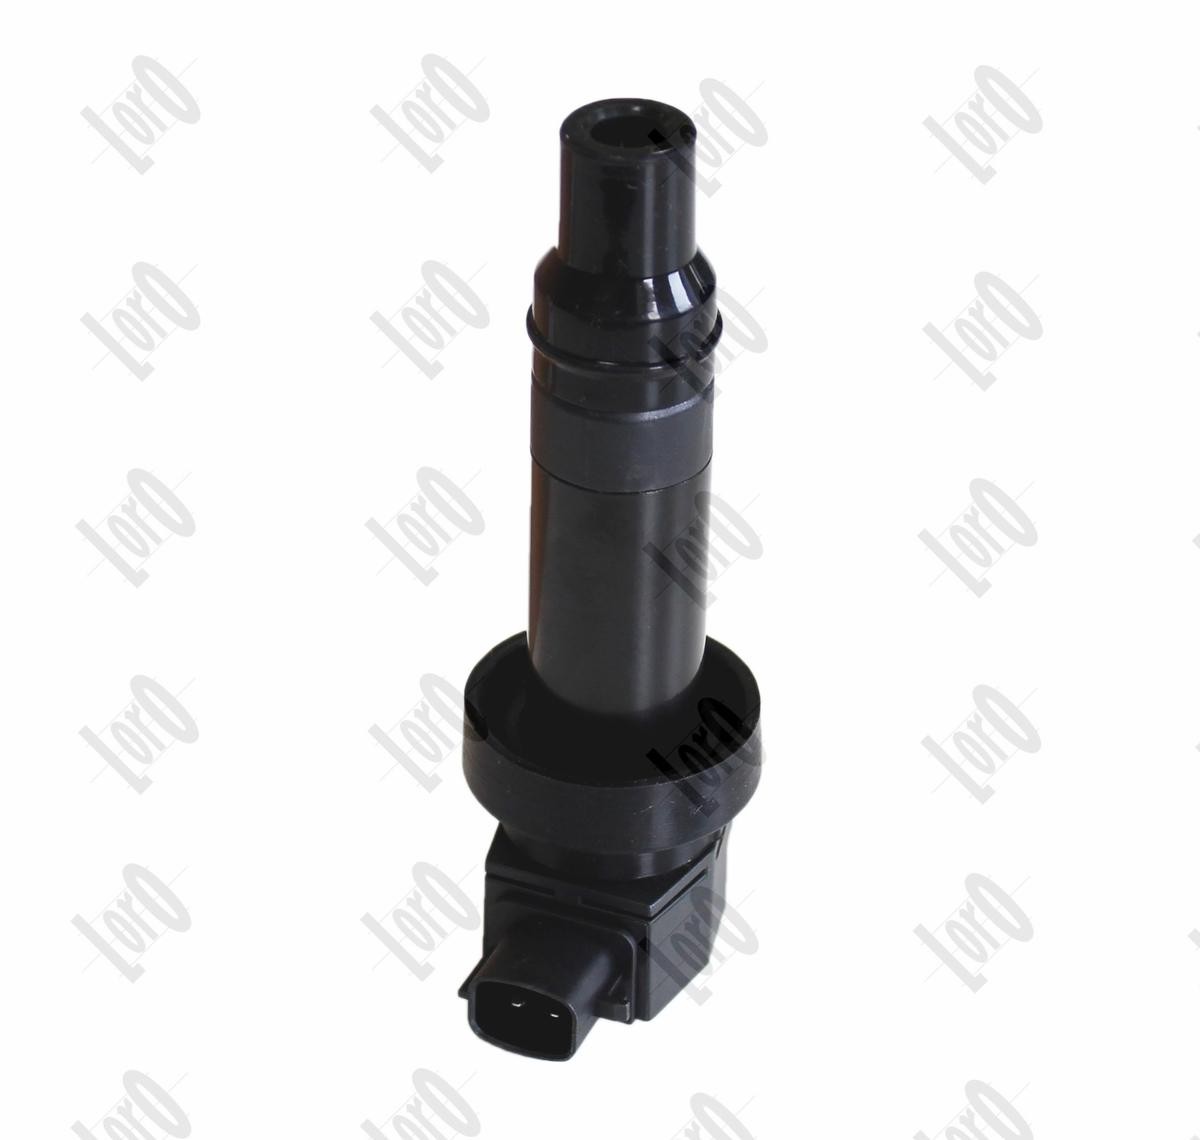 ABAKUS 122-01-115 Ignition coil 2-pin connector, Connector Type SAE